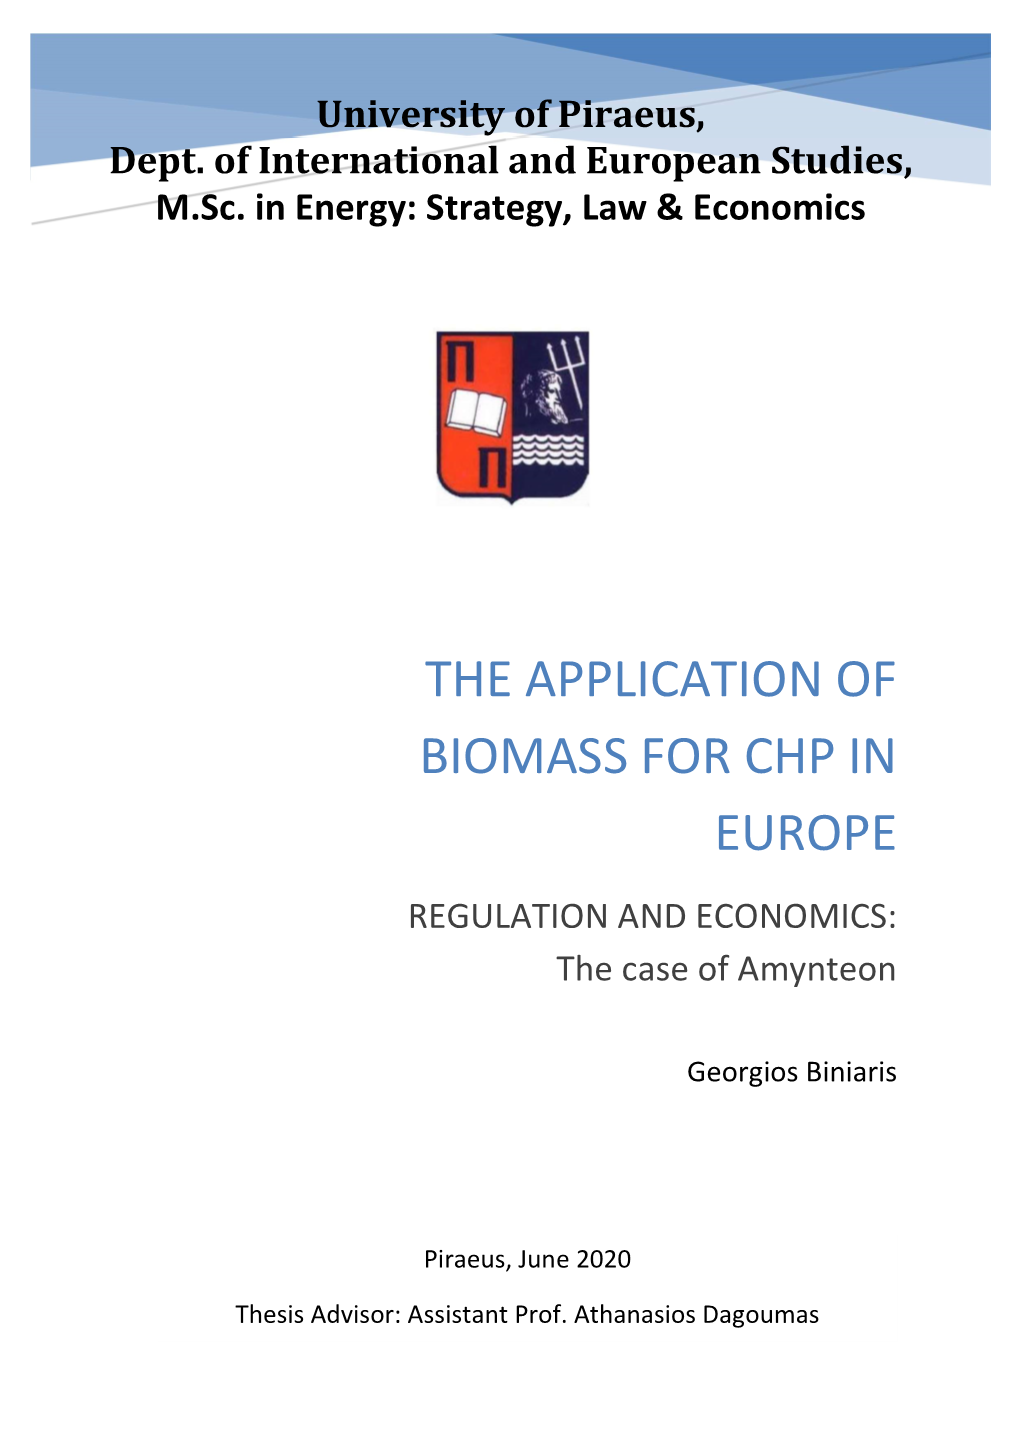 THE APPLICATION of BIOMASS for CHP in EUROPE REGULATION and ECONOMICS: the Case of Amynteon